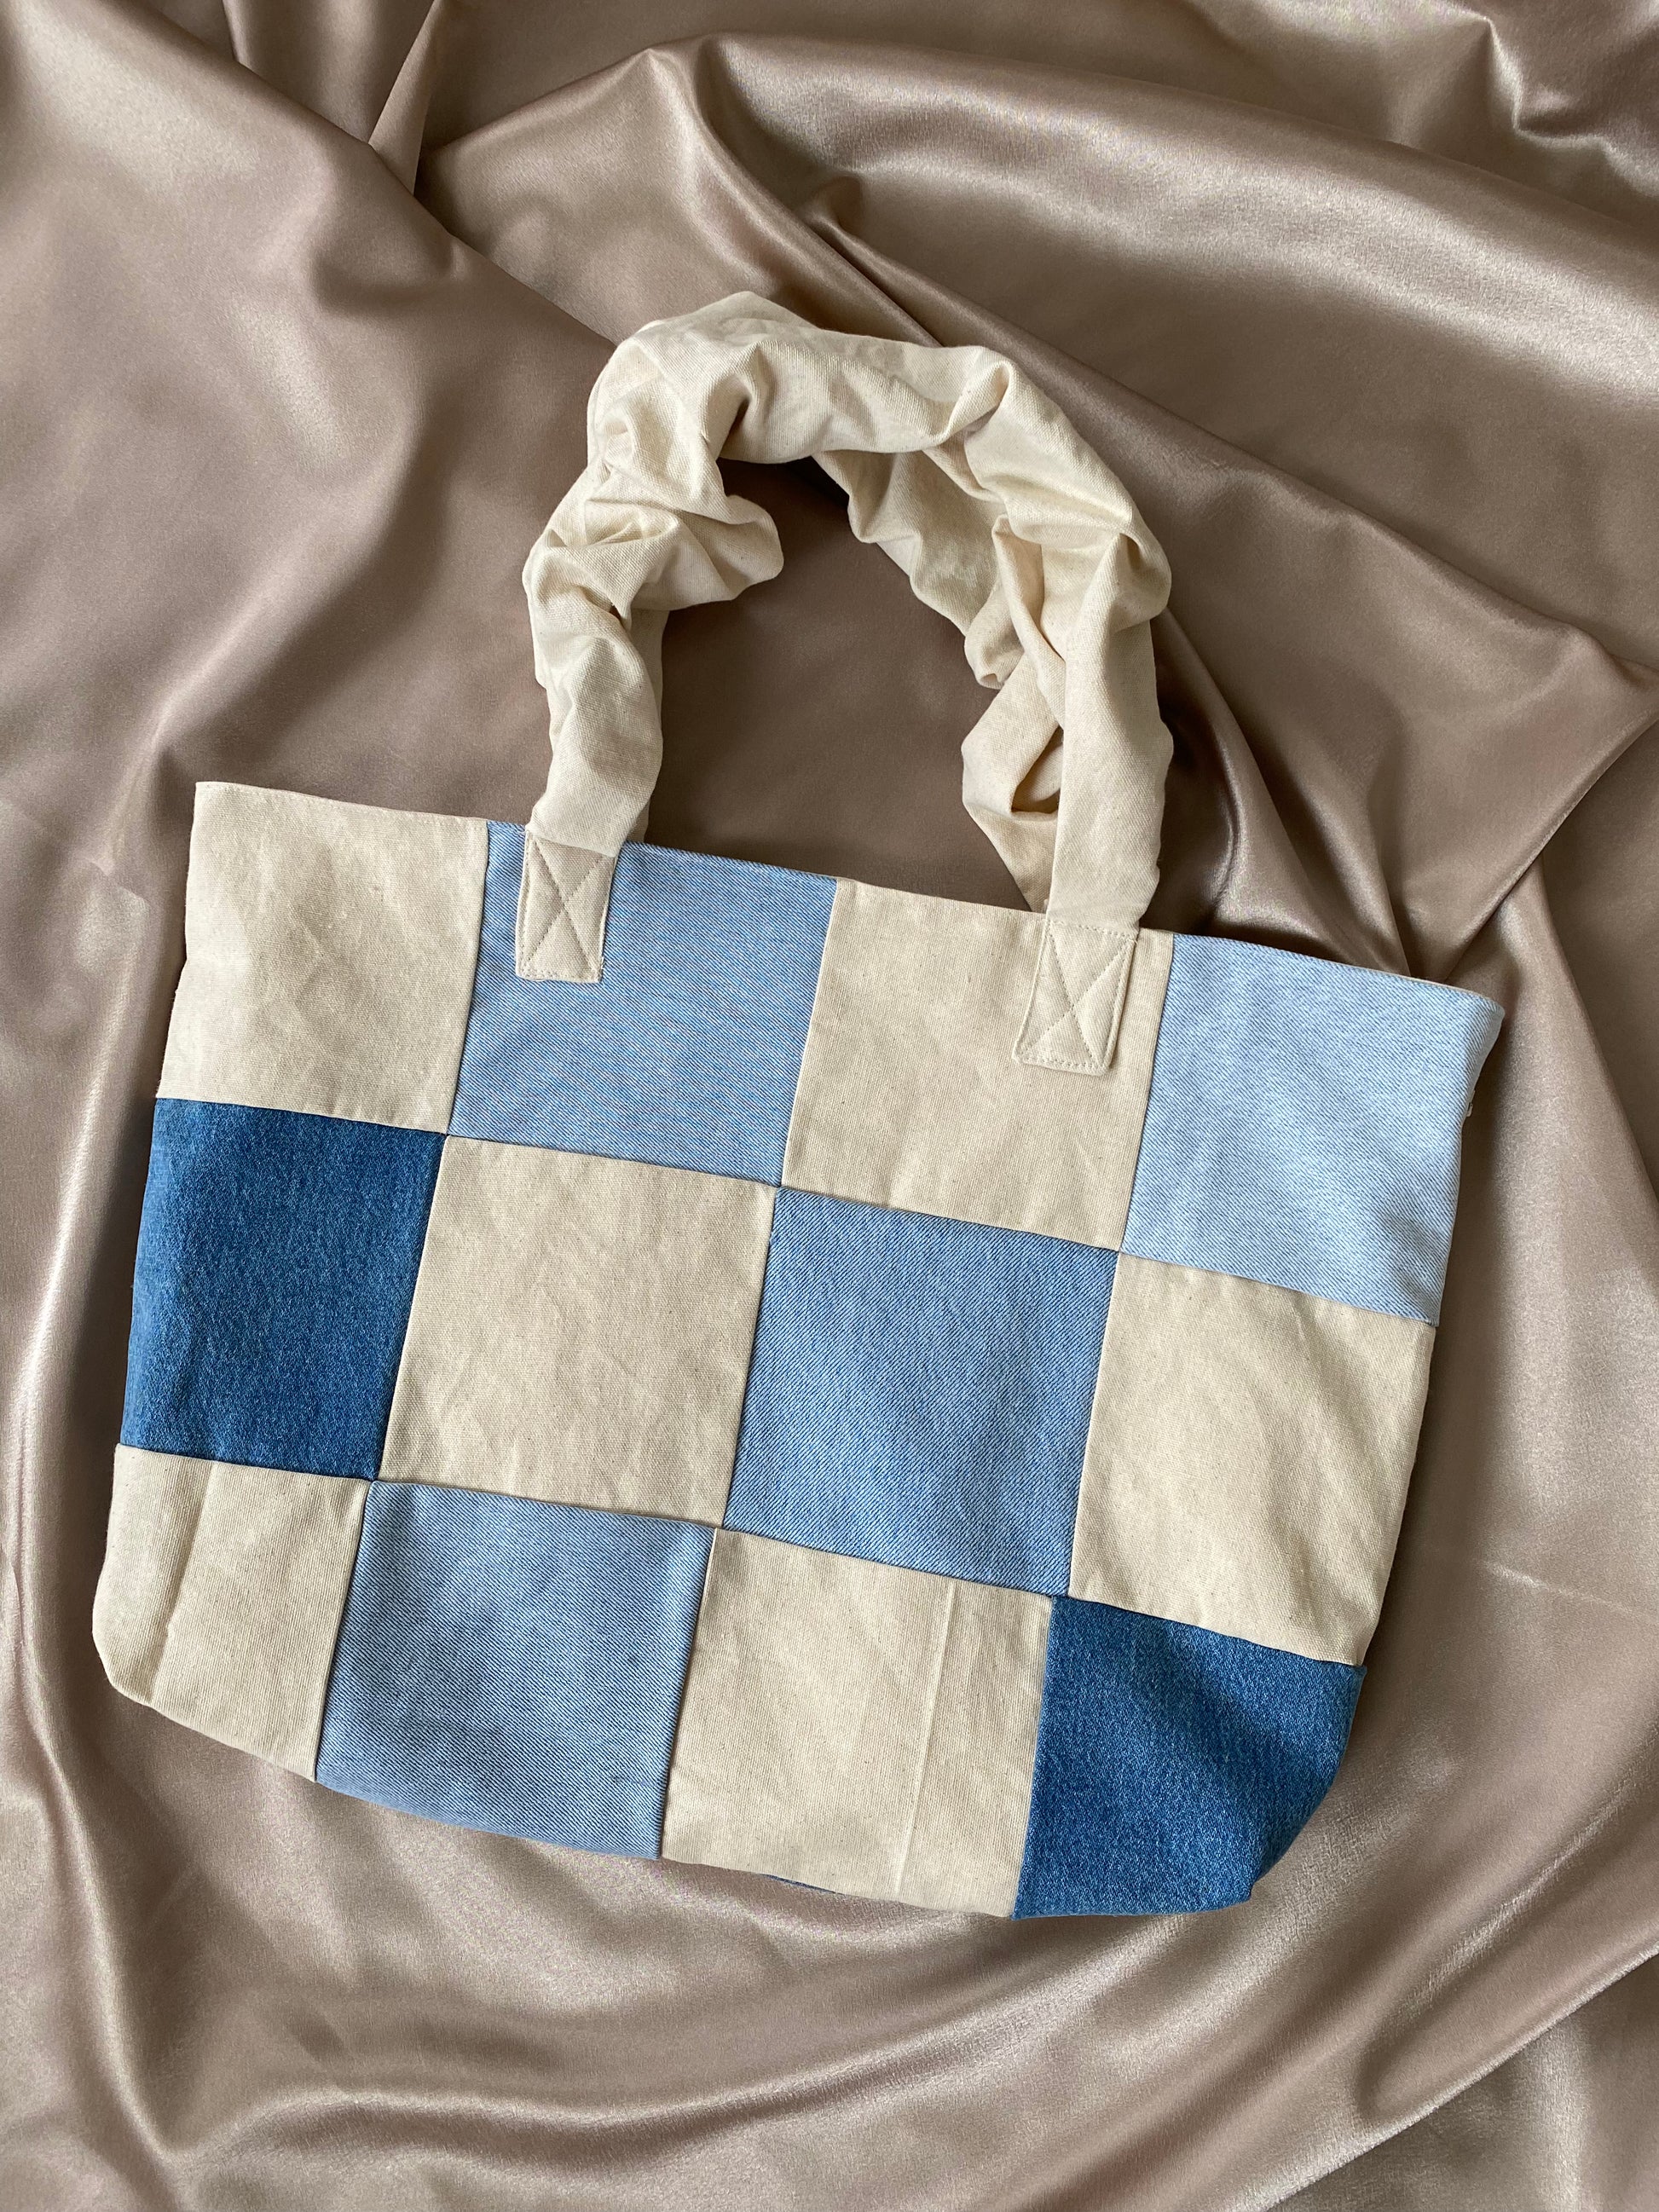 Patch Work Tote Bags